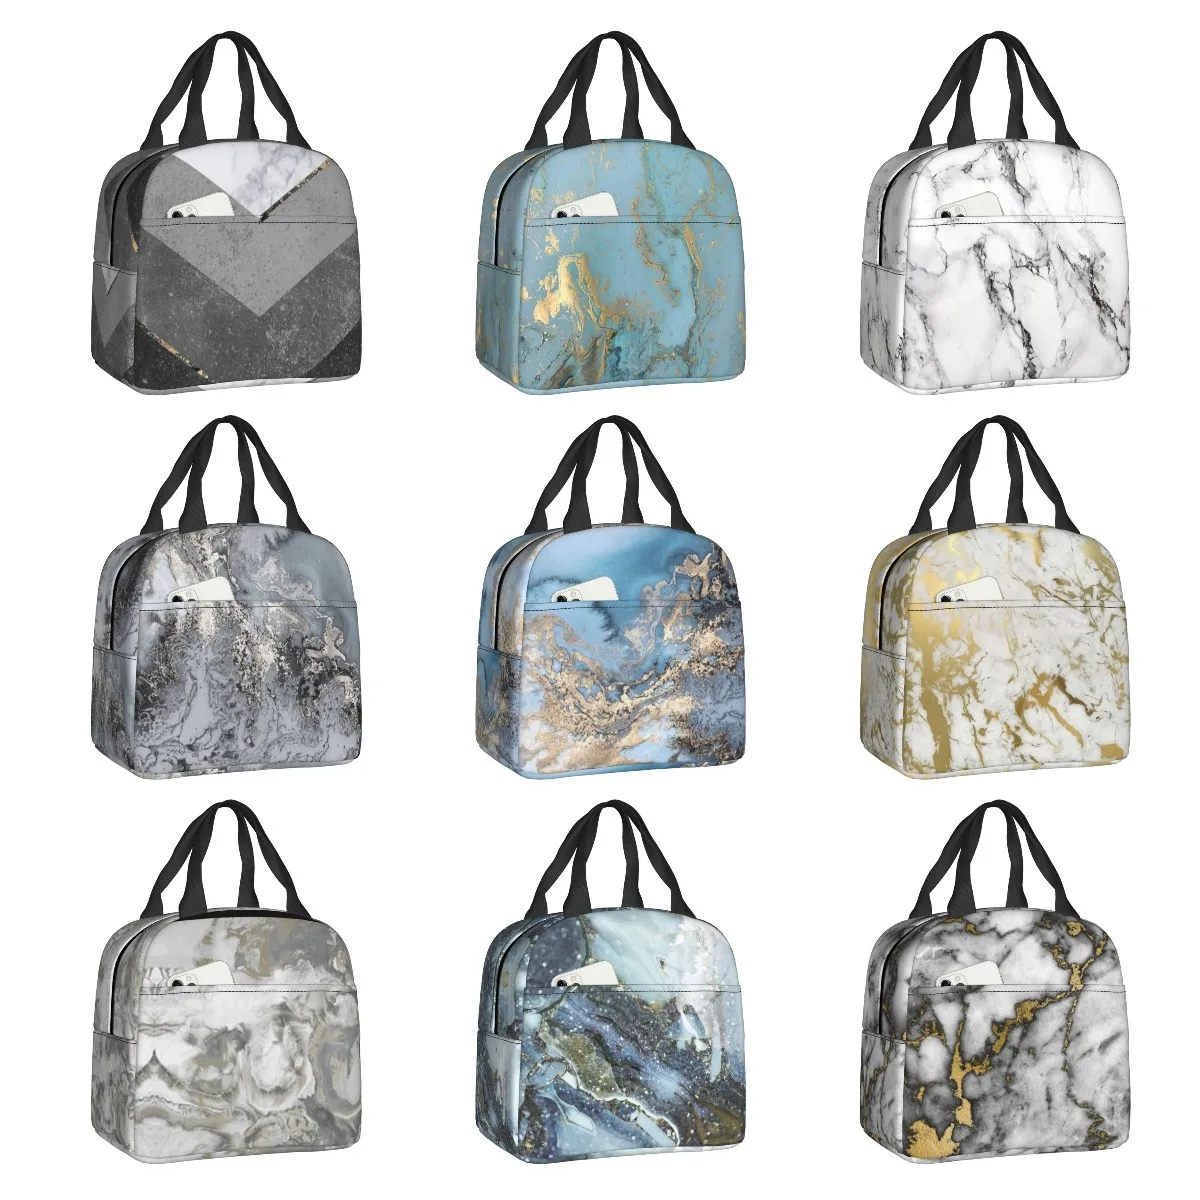 https://ae01.alicdn.com/kf/S0f6296294d1044ebbd8e3a824029c1120/Marble-Gray-Copper-Black-Gold-Insulated-Lunch-Bags-for-Women-Abstract-Pattern-Cooler-Thermal-Food-Lunch.jpg